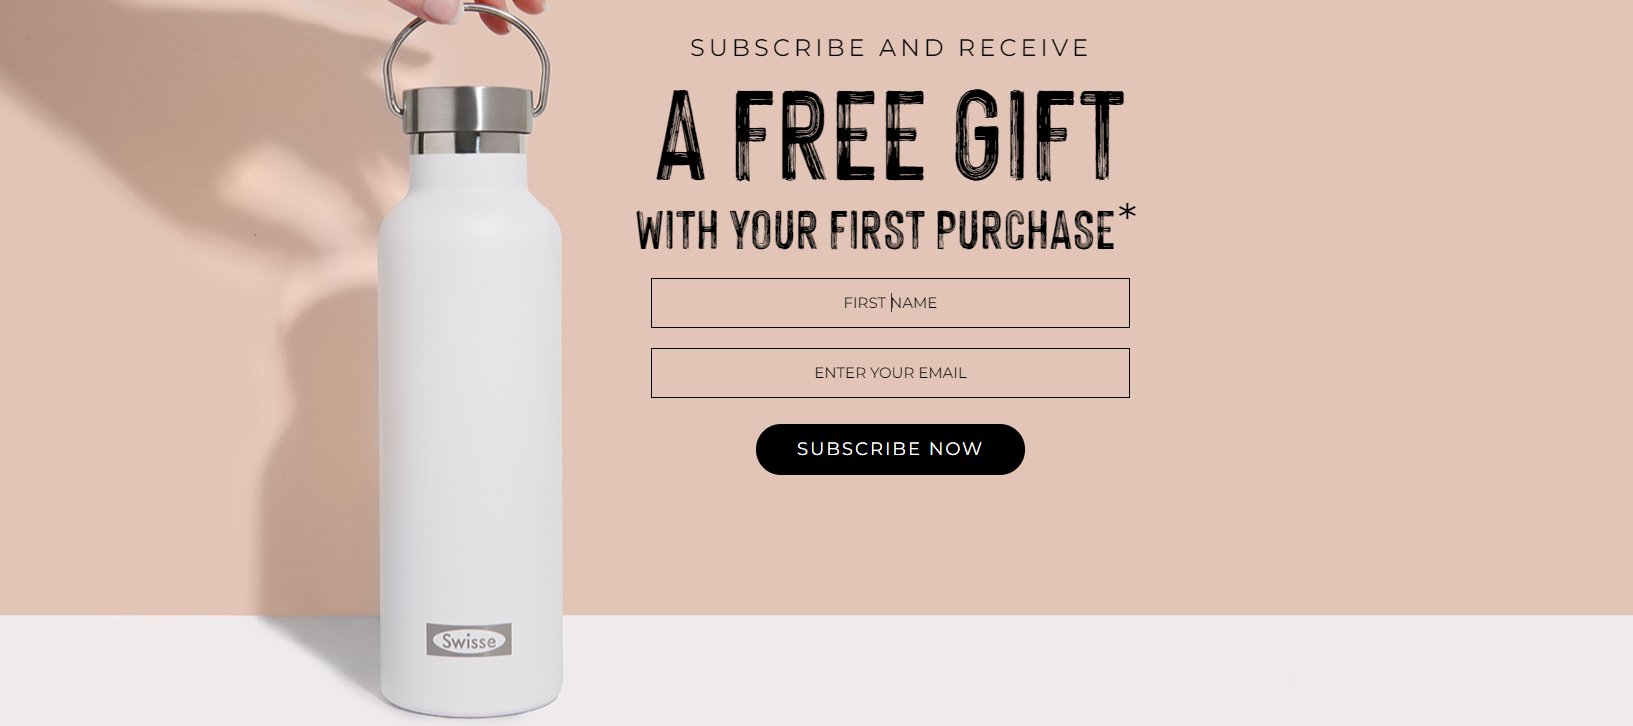 Get a FREE gift with your first purchase at Swisse when you sign up